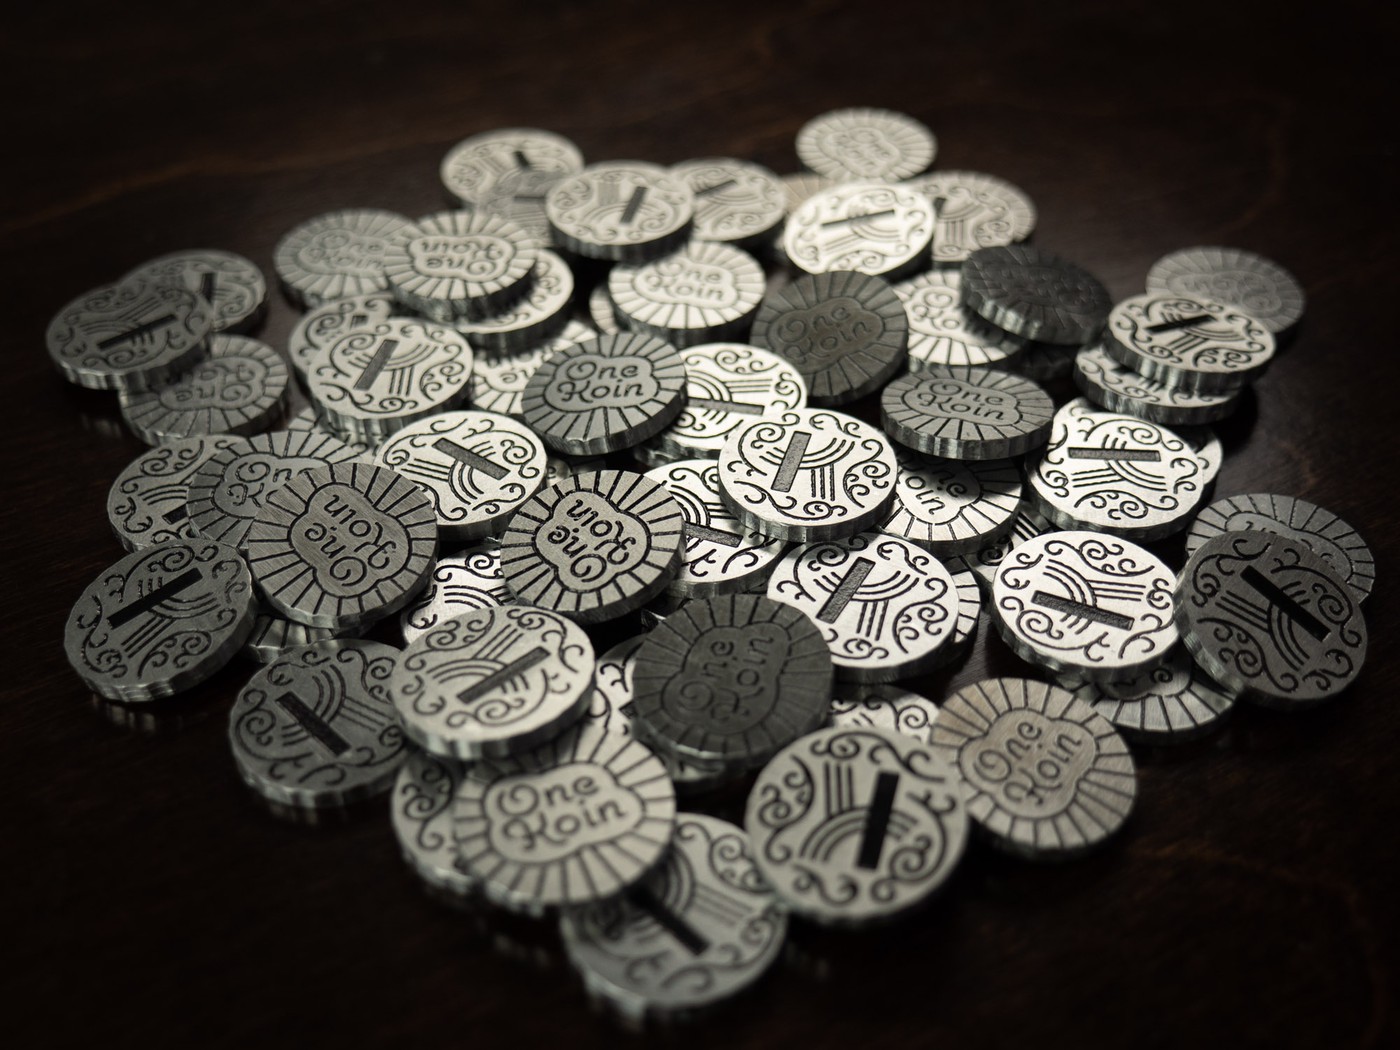 dramatically lit pile of coins against dark background